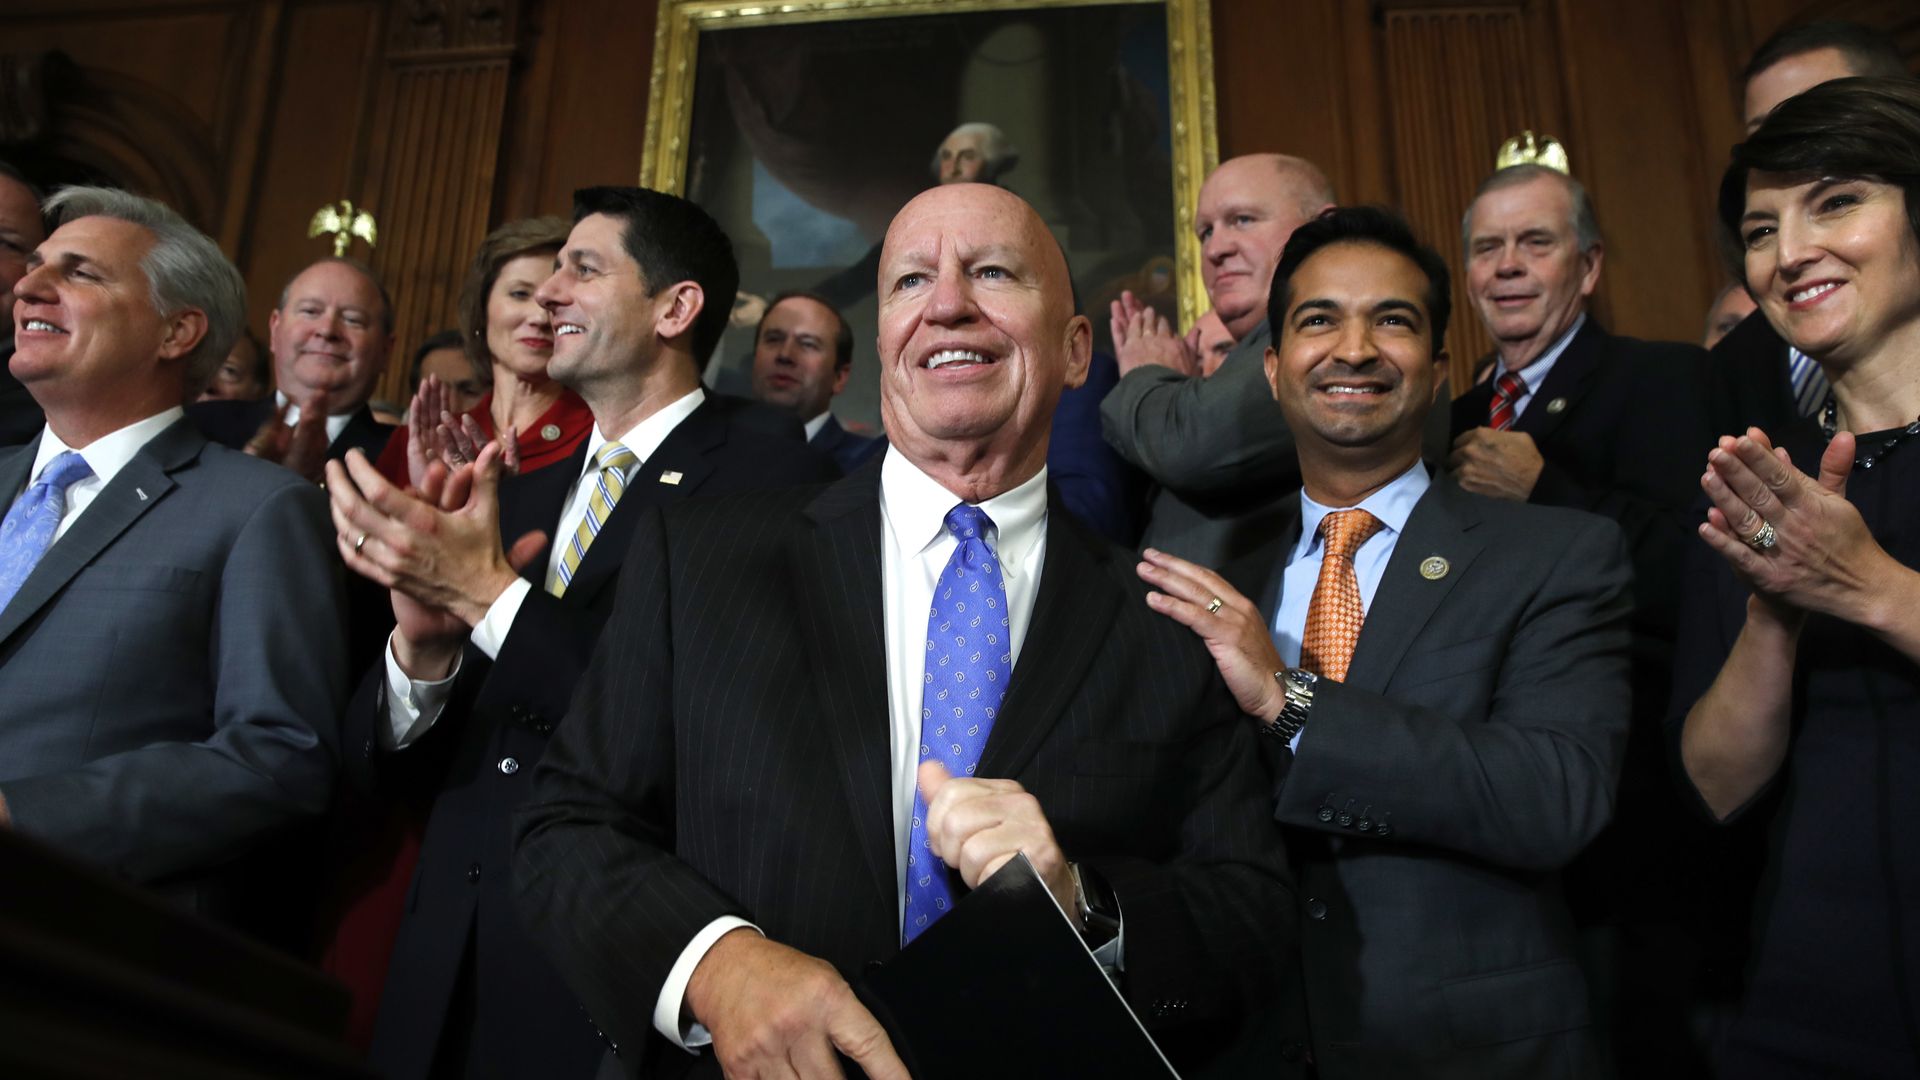 Chairman Kevin Brady applauded the release of ACA tax relief bills. Photo: Jacquelyn Martin / AP